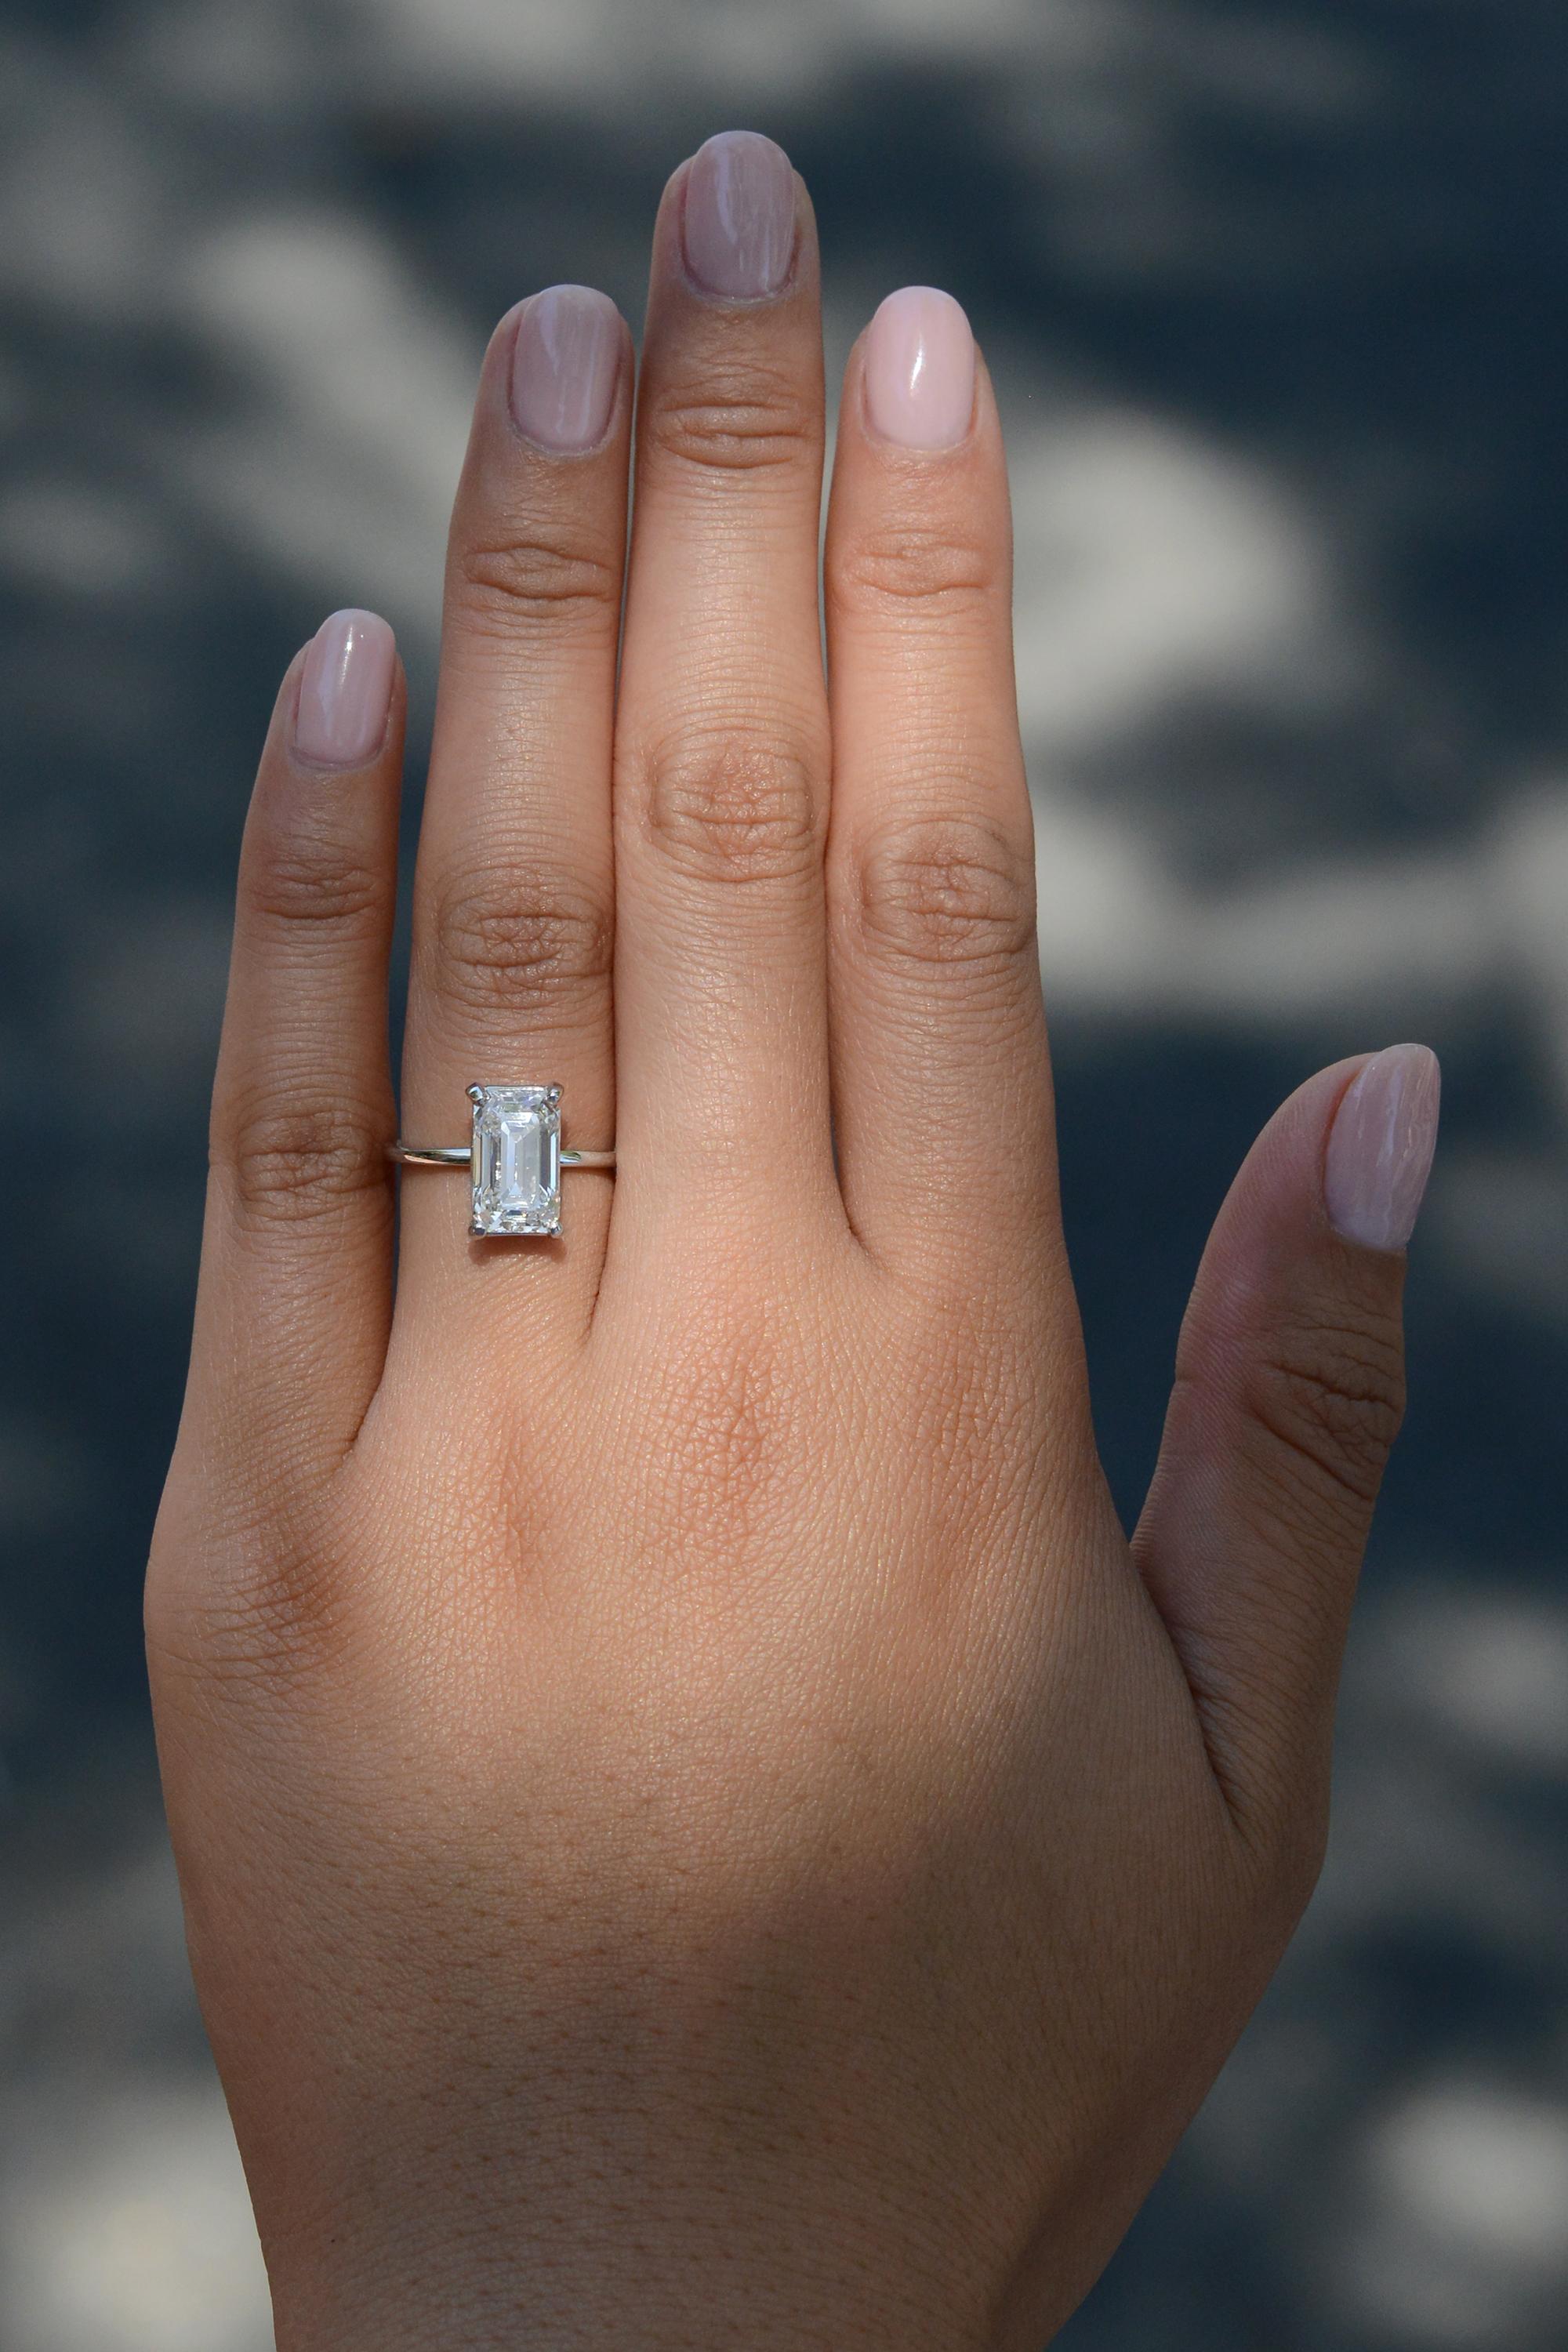 A tour de force of haute joaillerie, this exquisite emerald cut diamond ring features a mesmerizing 3.10 carat emerald cut diamond certified by the Gemological Institute of America (GIA) for its paramount quality and radiance. Graded as an F,